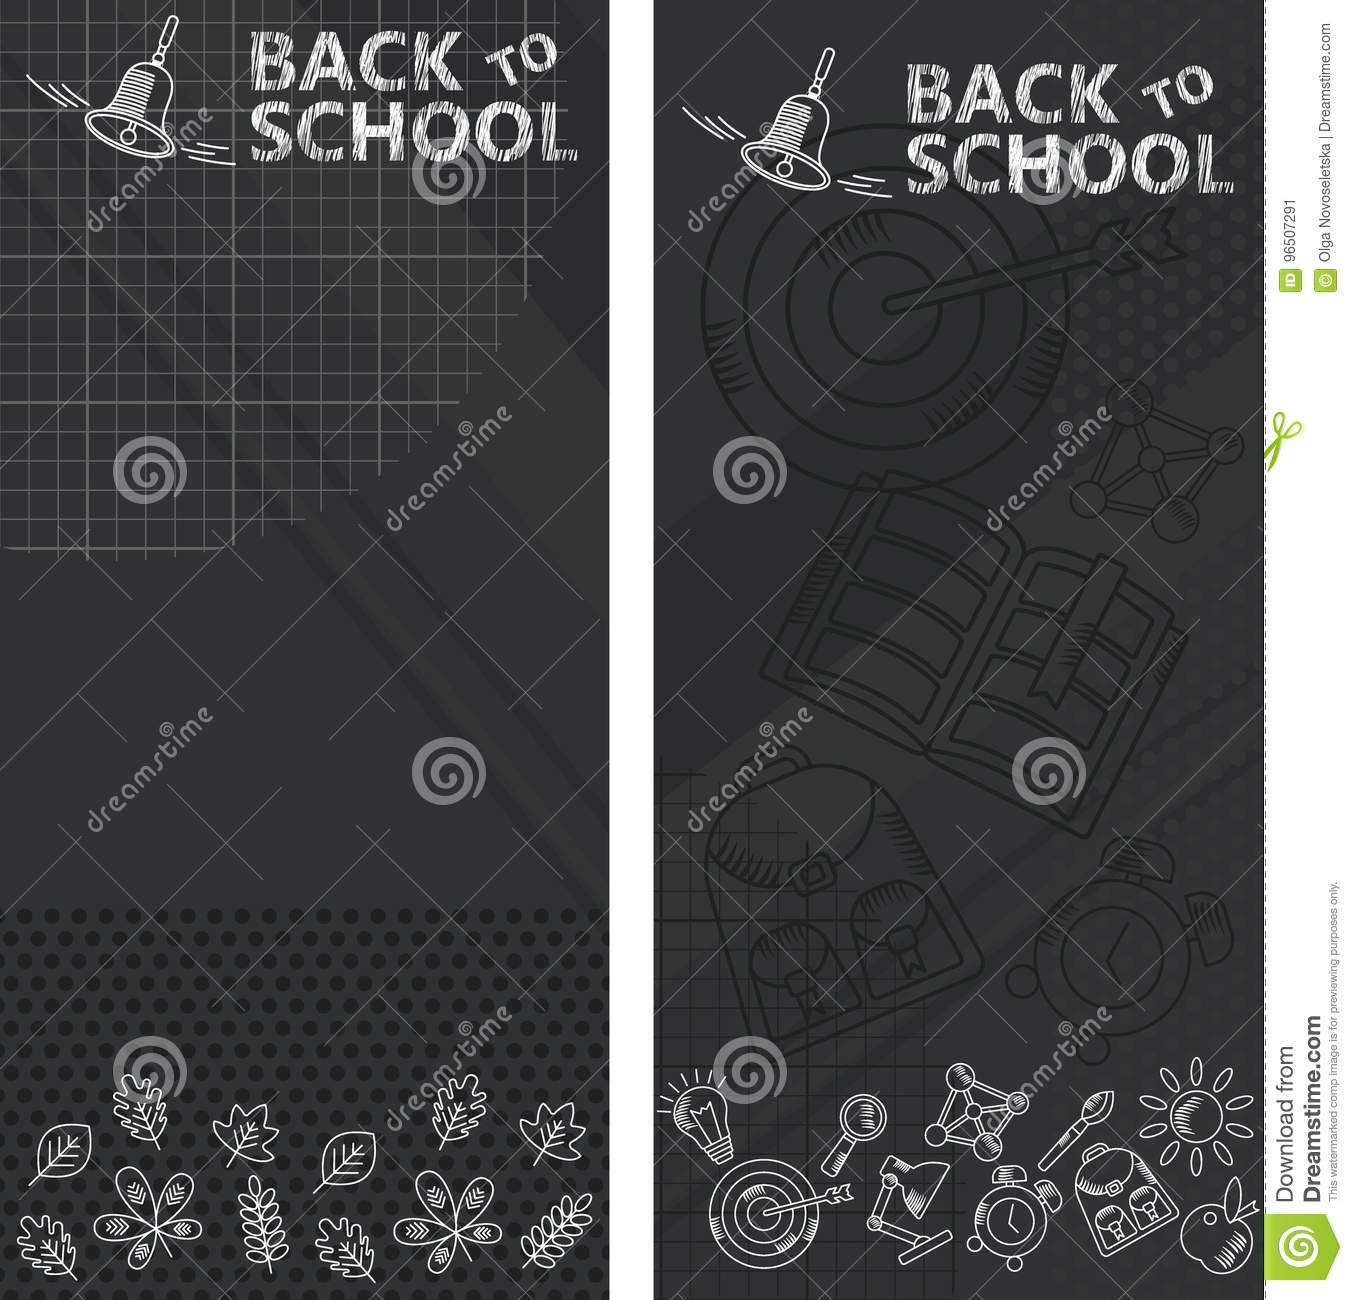 Black School Banners Stock Vector. Illustration Of Eraser With Classroom Banner Template